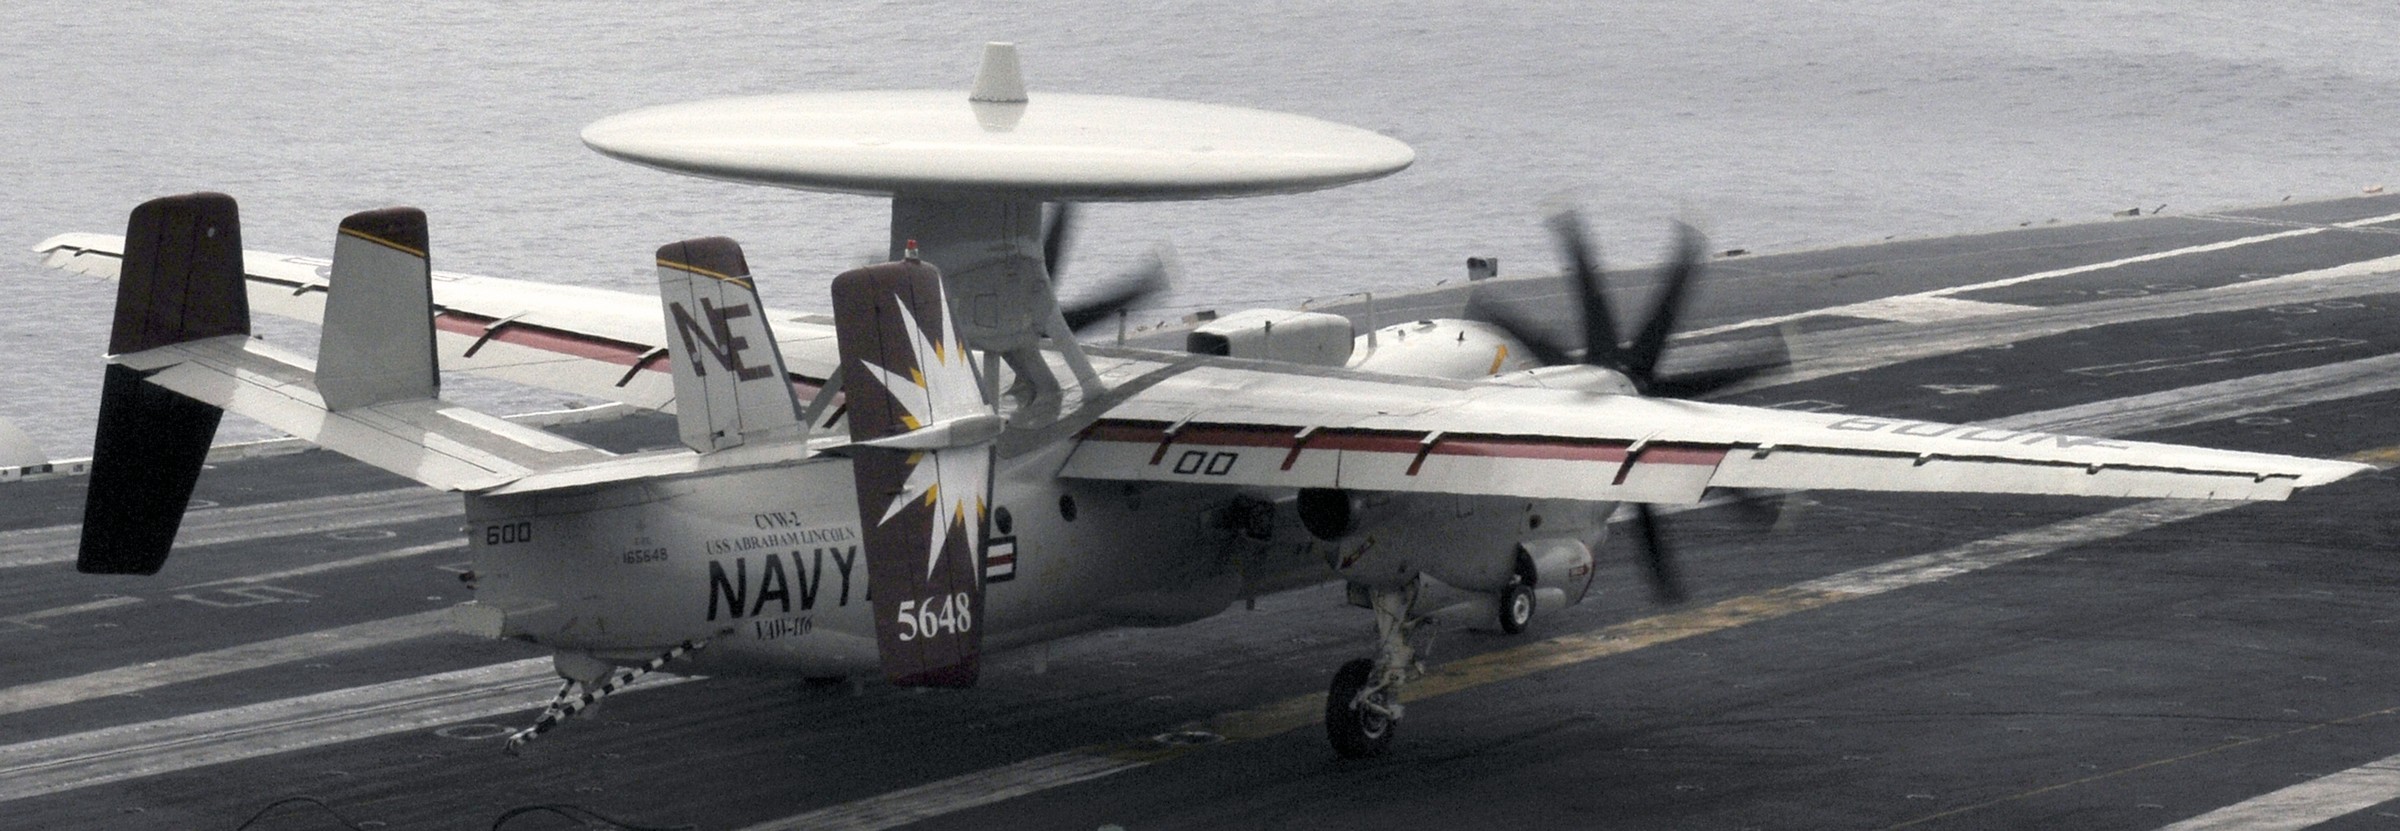 vaw-116 sun kings airborne command control squadron carrier early warning cvw-2 uss abraham lincoln cvn-72 25